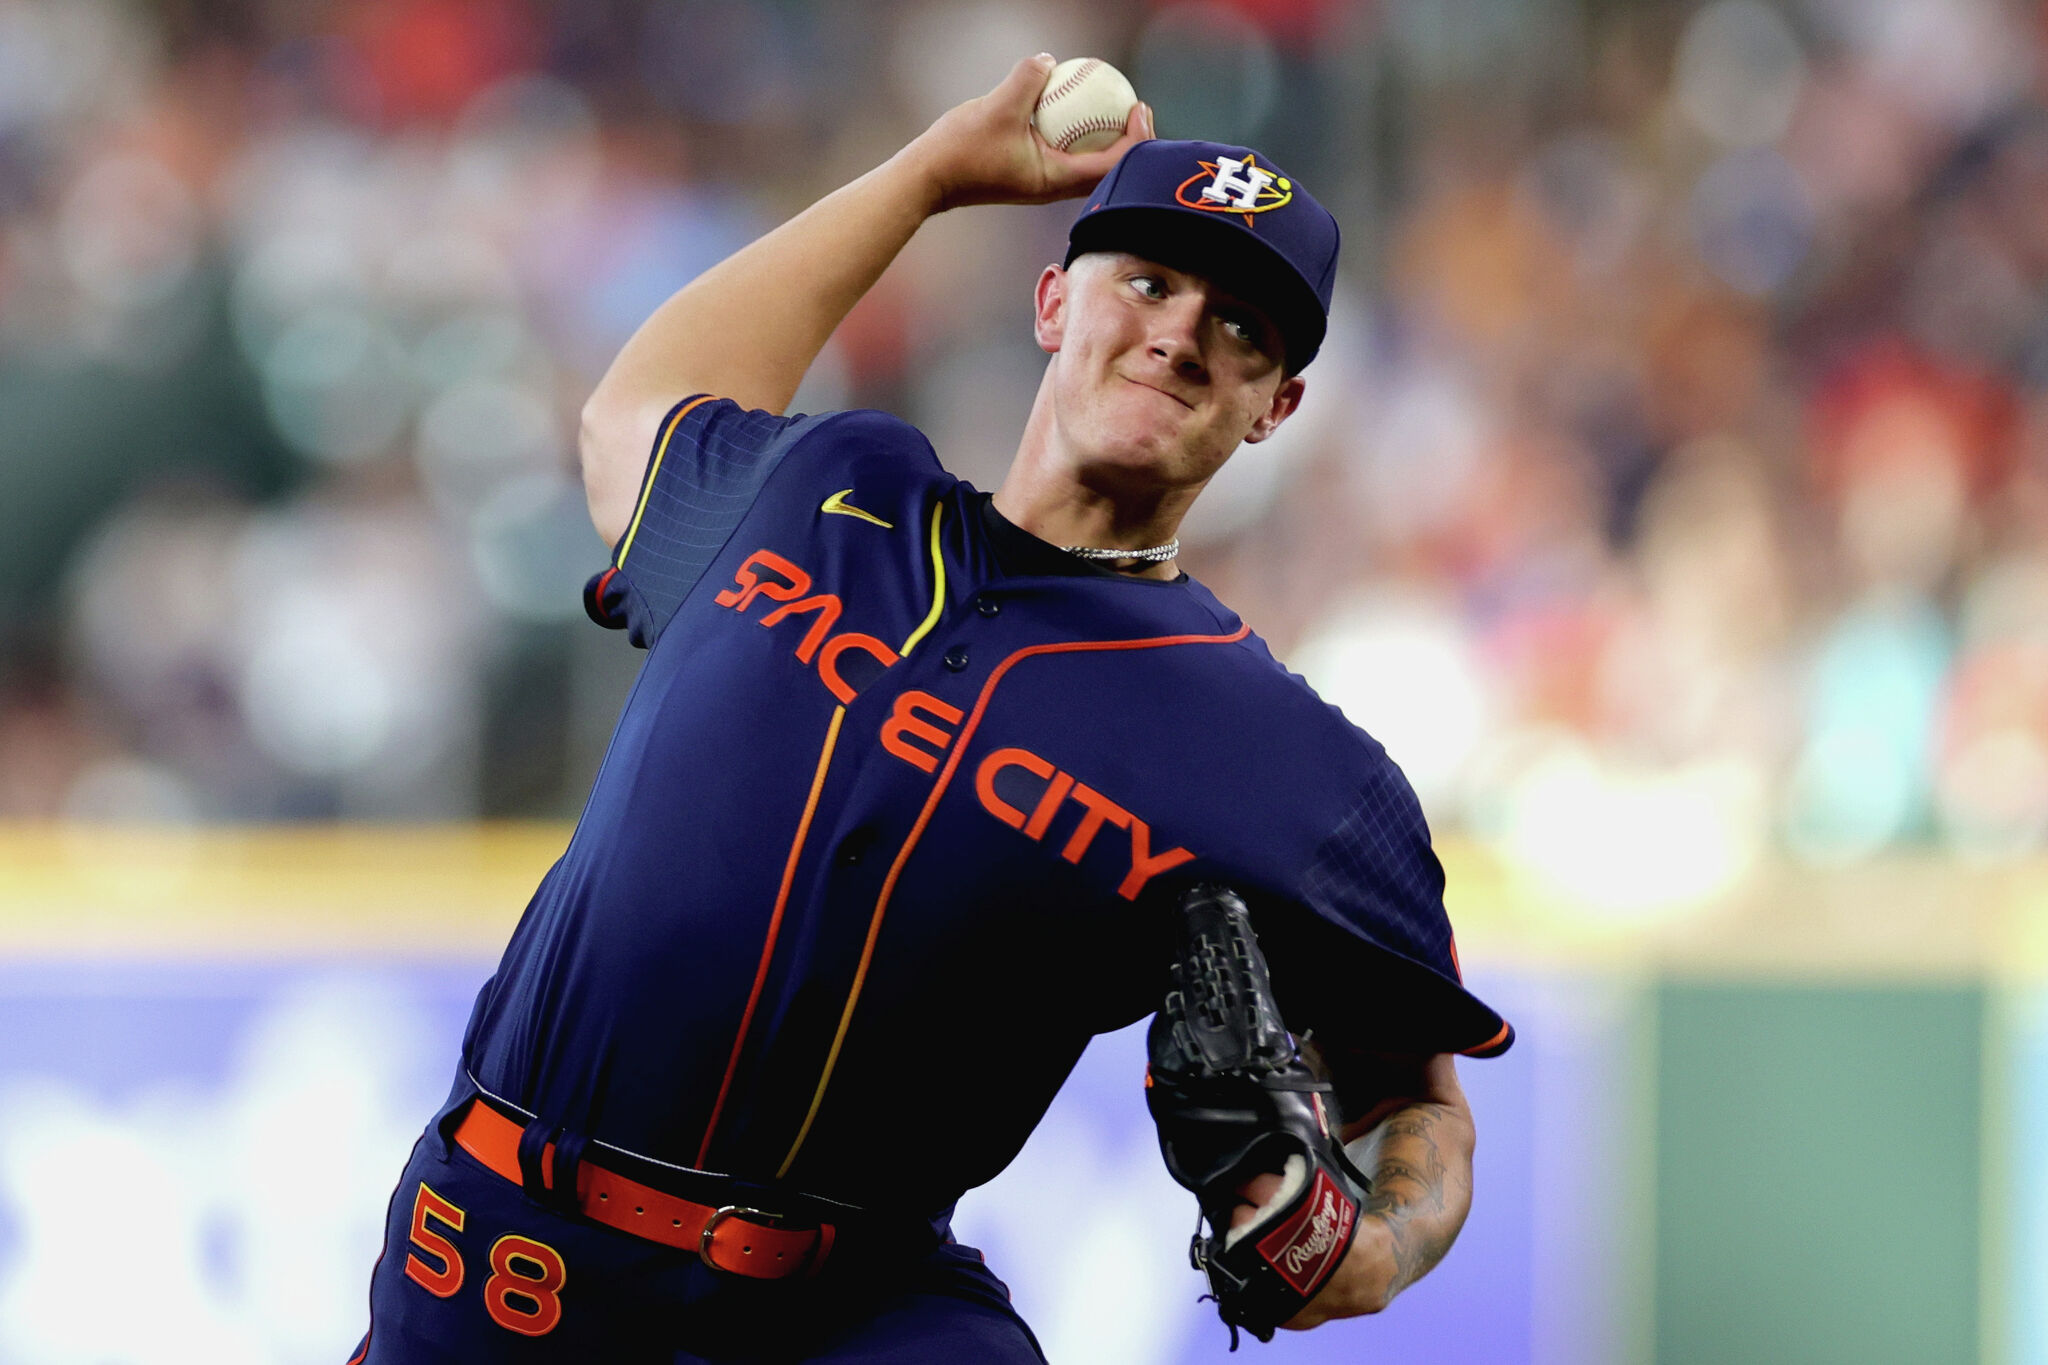 One under-the-radar Houston Astros contract extension option